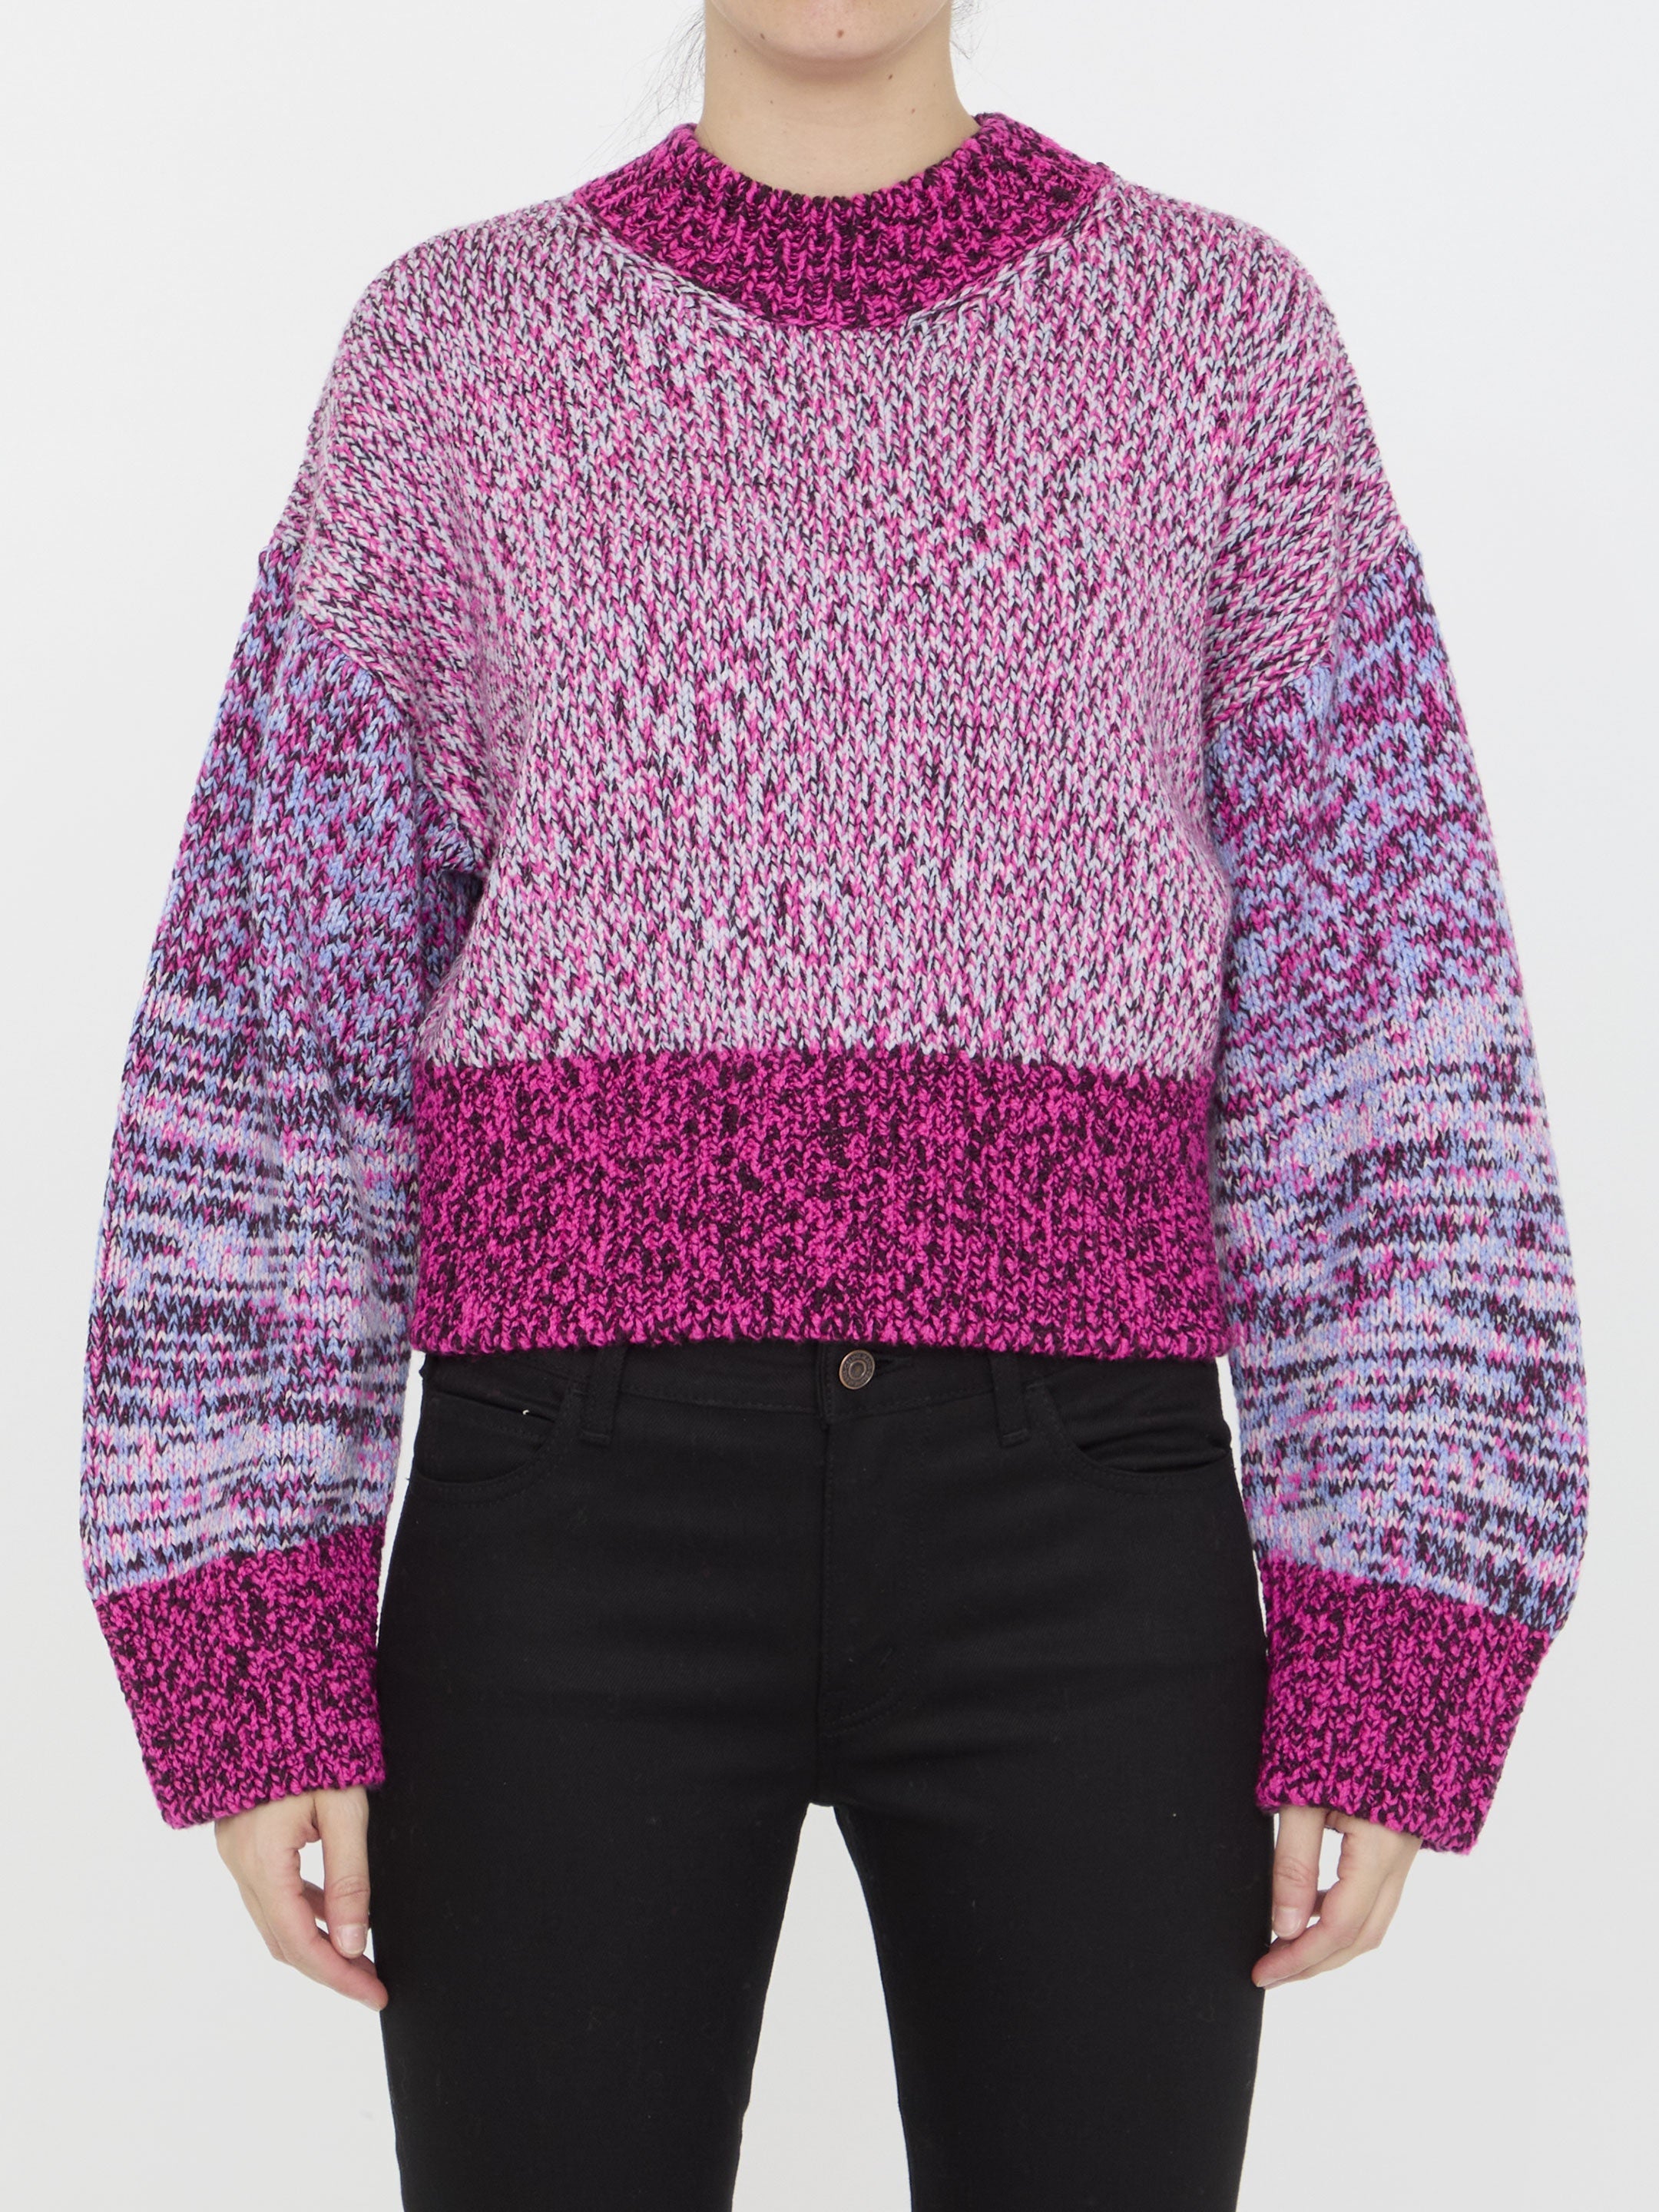 LOEWE-OUTLET-SALE-Wool-sweater-Strick-M-PINK-ARCHIVE-COLLECTION.jpg